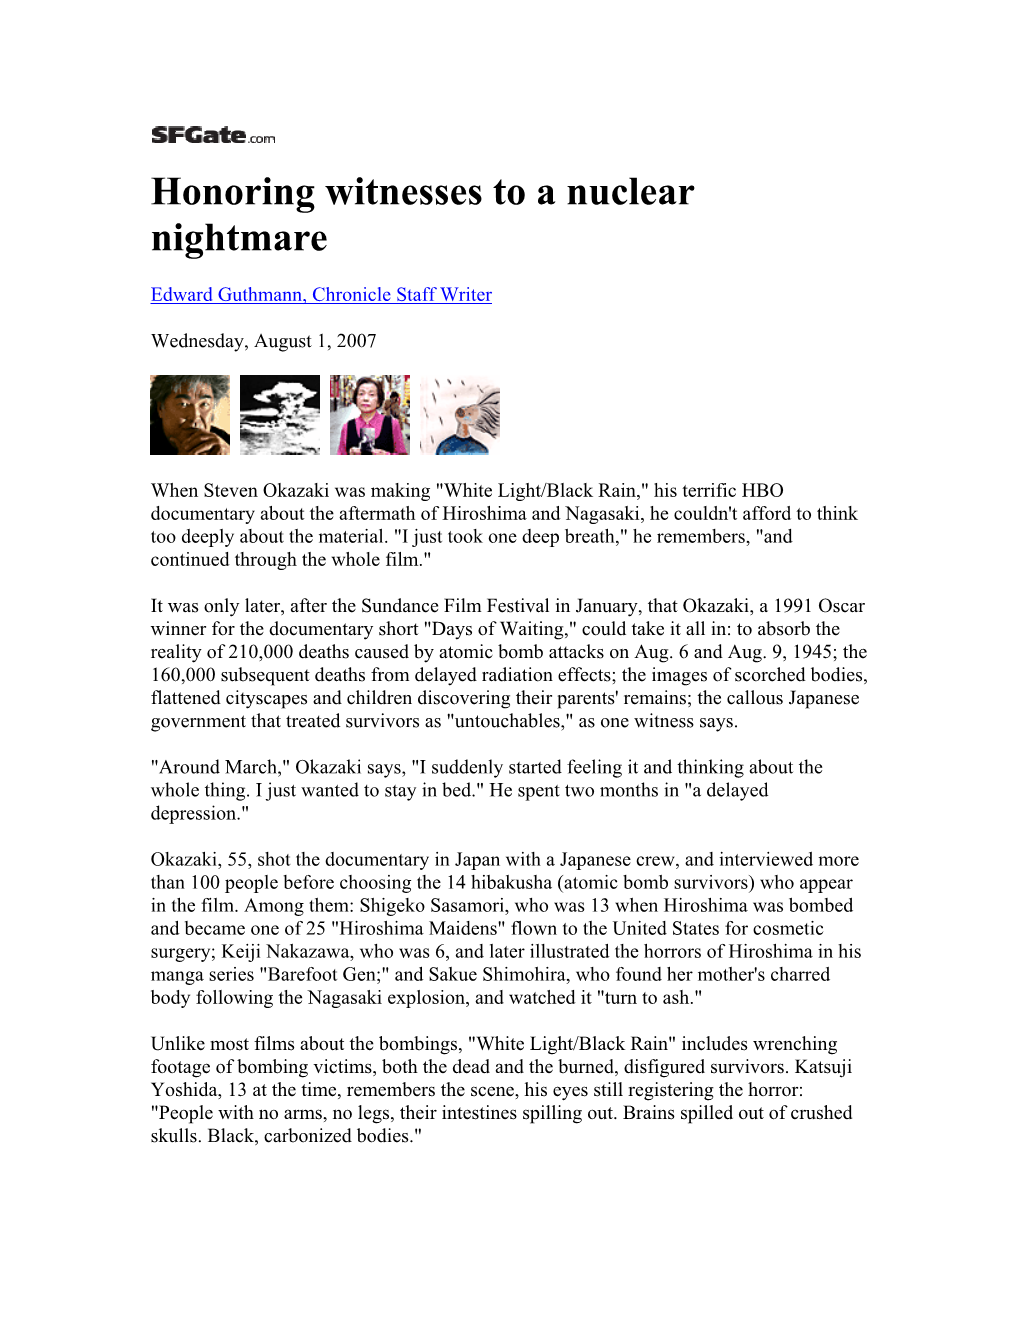 Honoring Witnesses to a Nuclear Nightmare